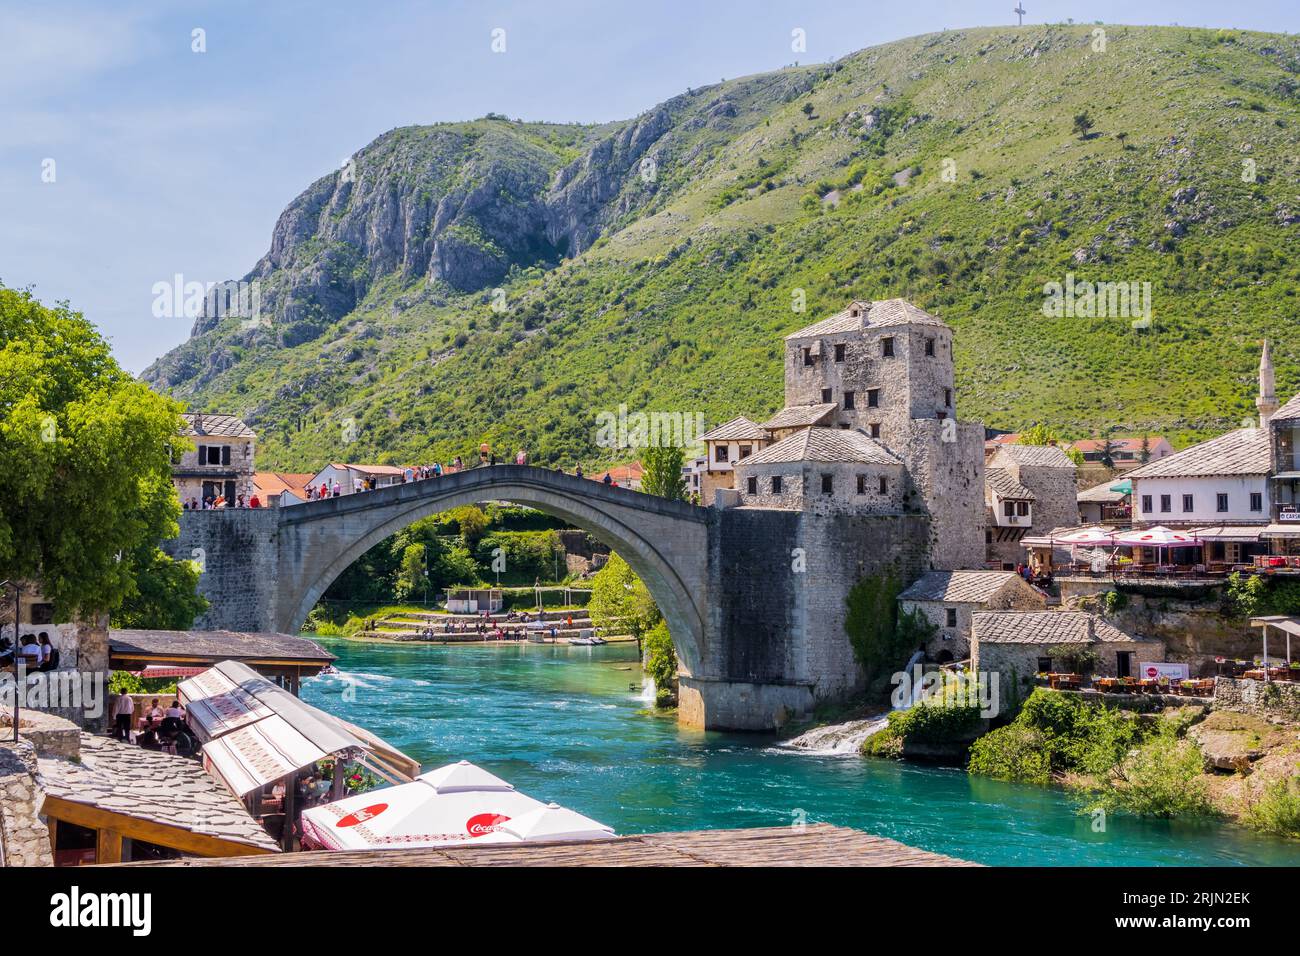 A scenic view of the historic bridge crossing over the picturesque river in the charming old town of Most Stock Photo